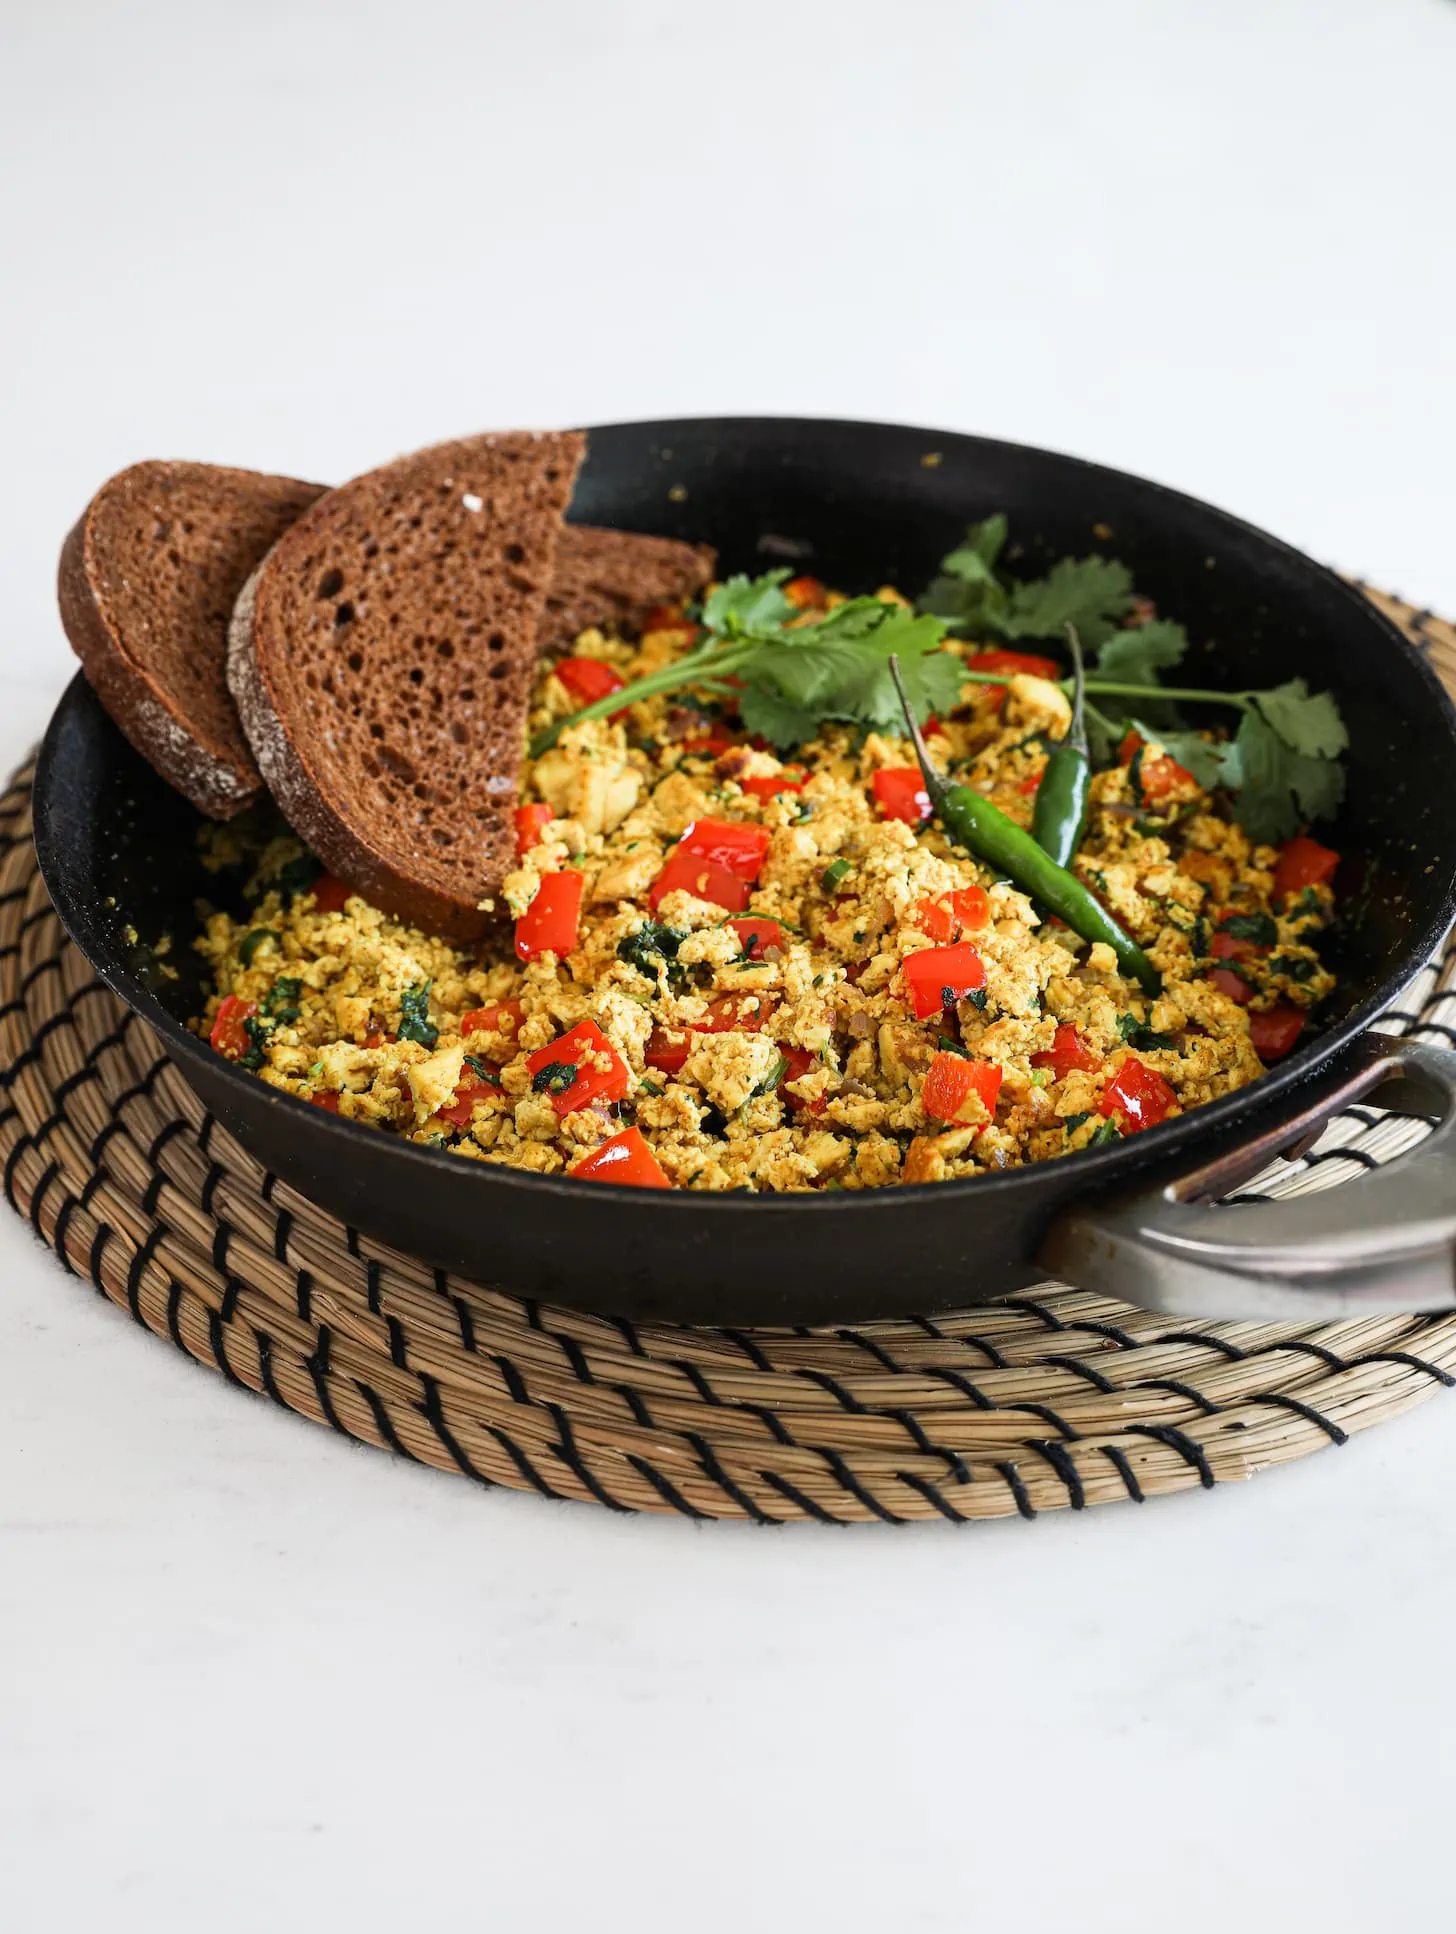 Perspective image of a fry pan of scramble with red pepper cubes topped with cilantro and green chilli and two slices of pumpernickel bread placed on top. The pan is placed on a rope place mat.